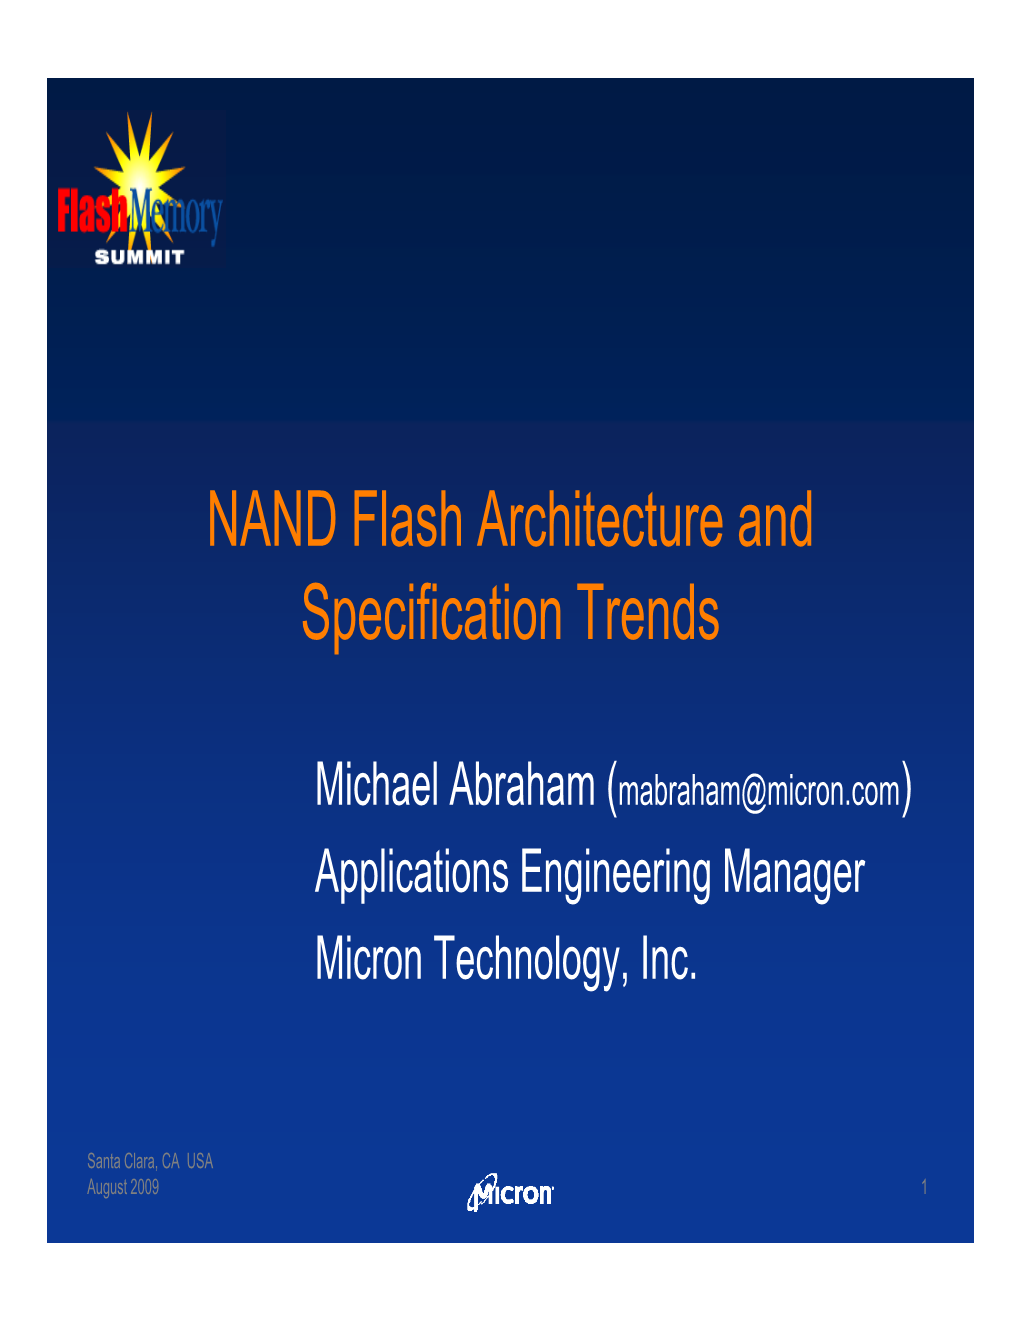 Micron: NAND Flash Architecture and Specification Trends